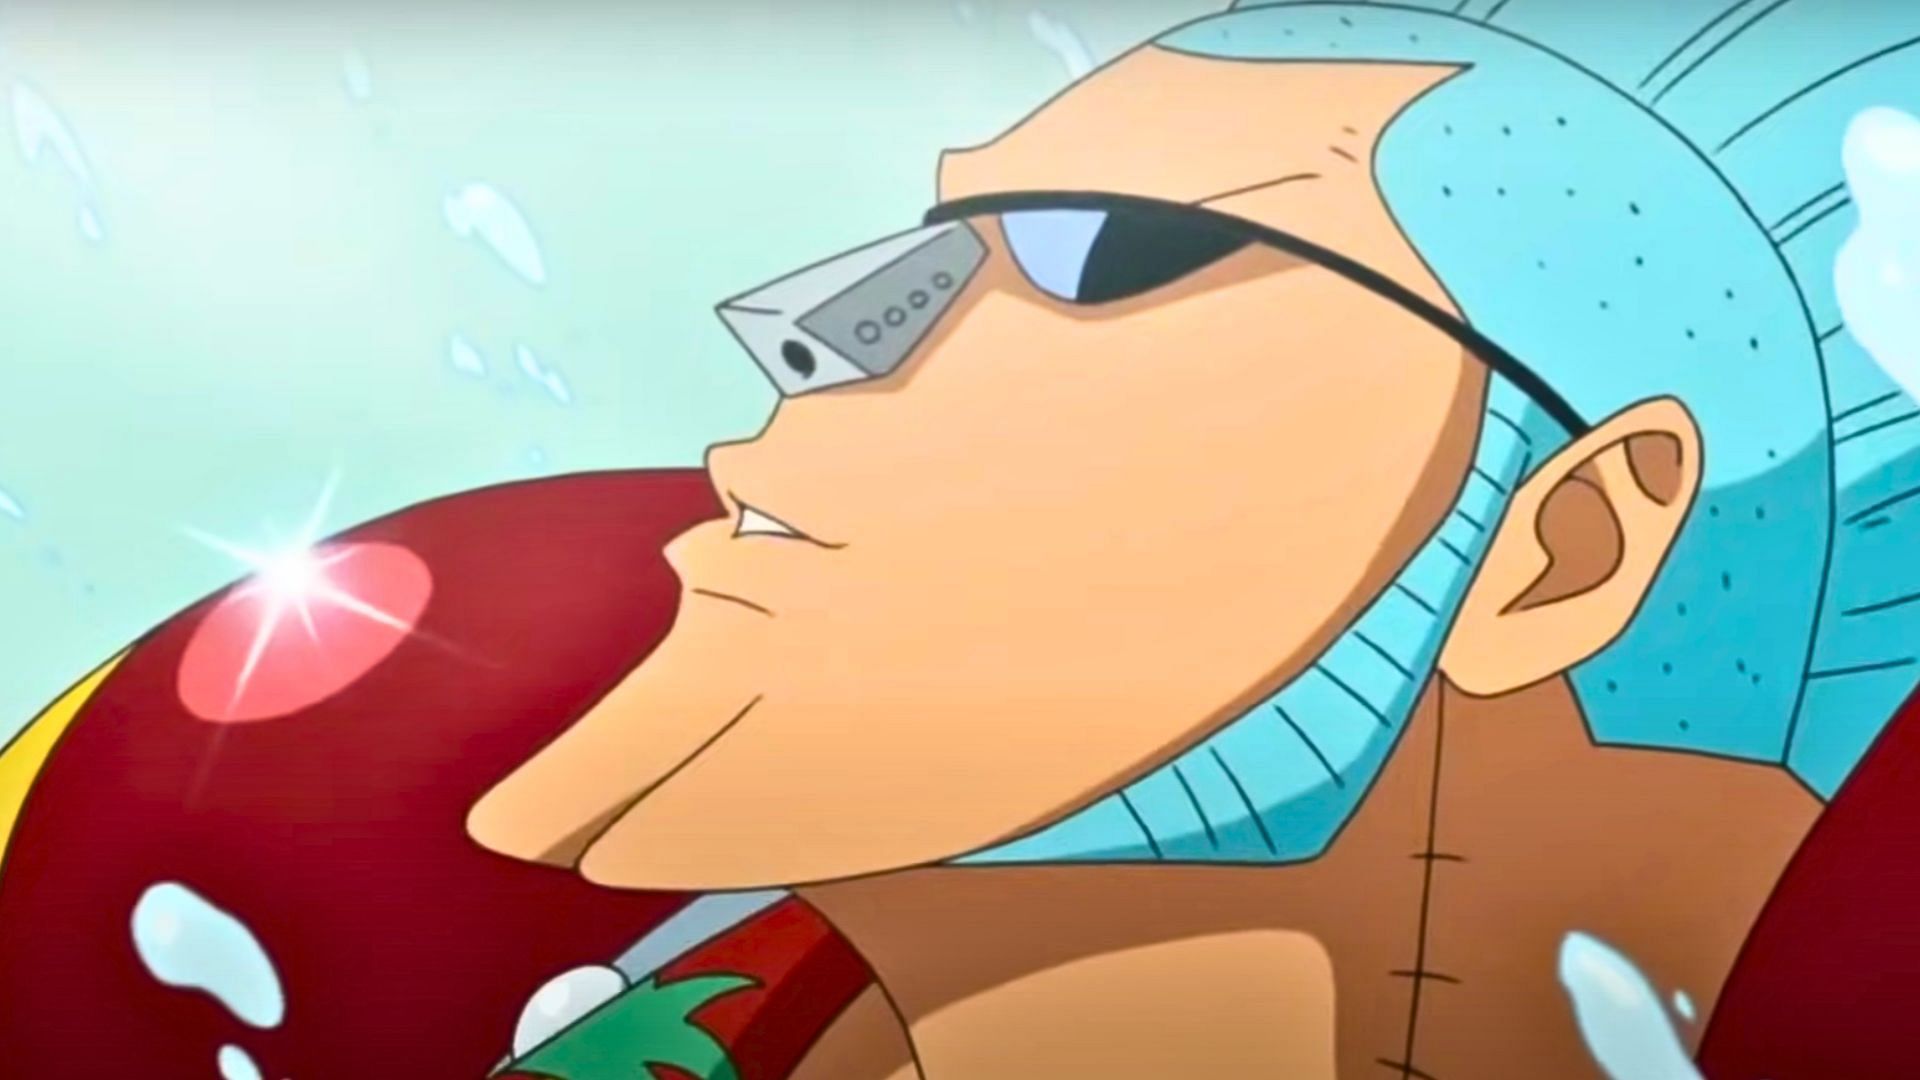 Franky as seen in One Piece (Image via Toei Animation)